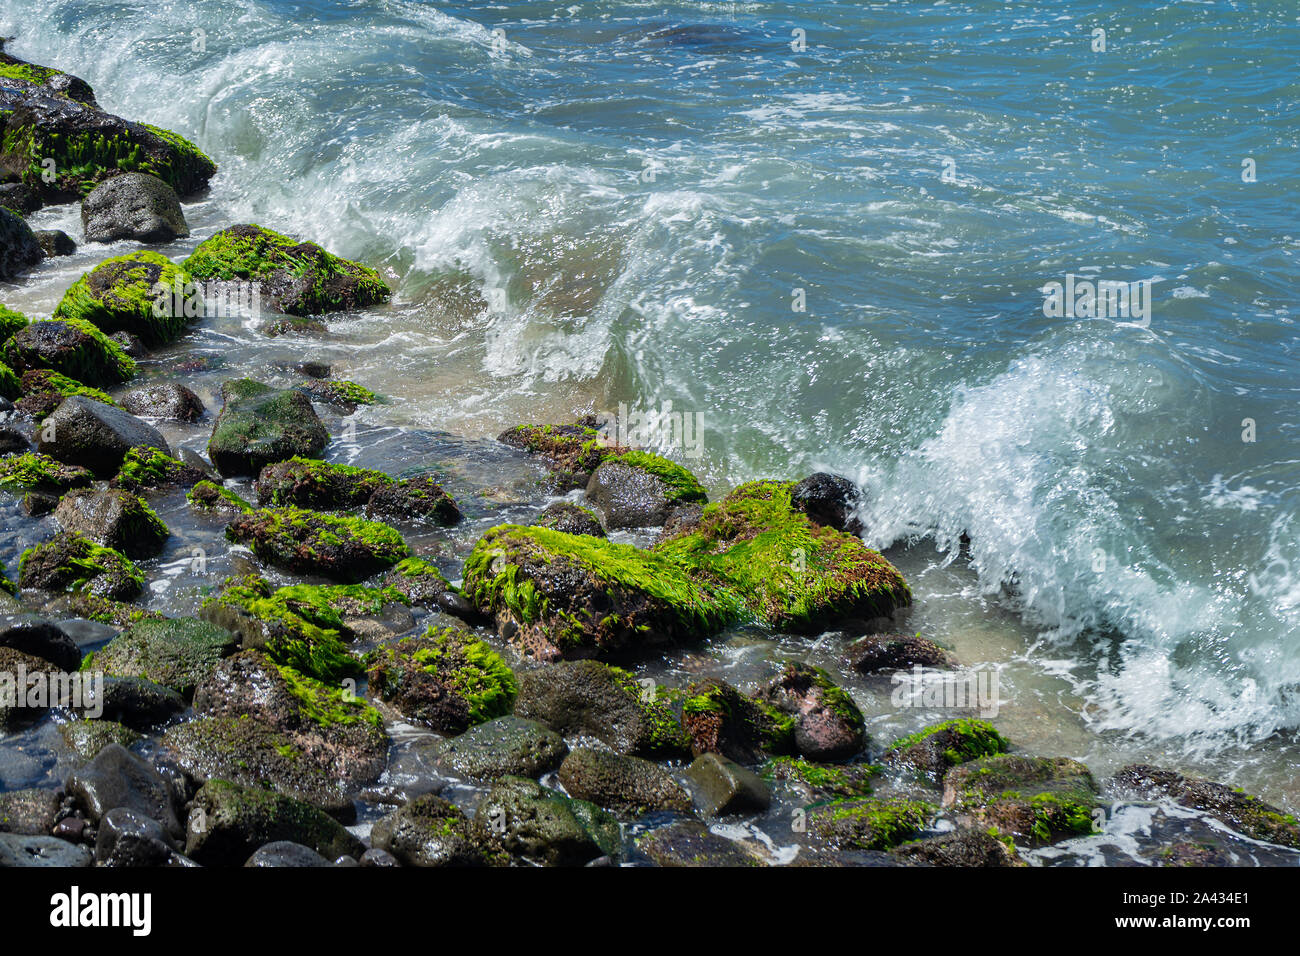 Green alge on beach stone with ocean wave coming in Stock Photo